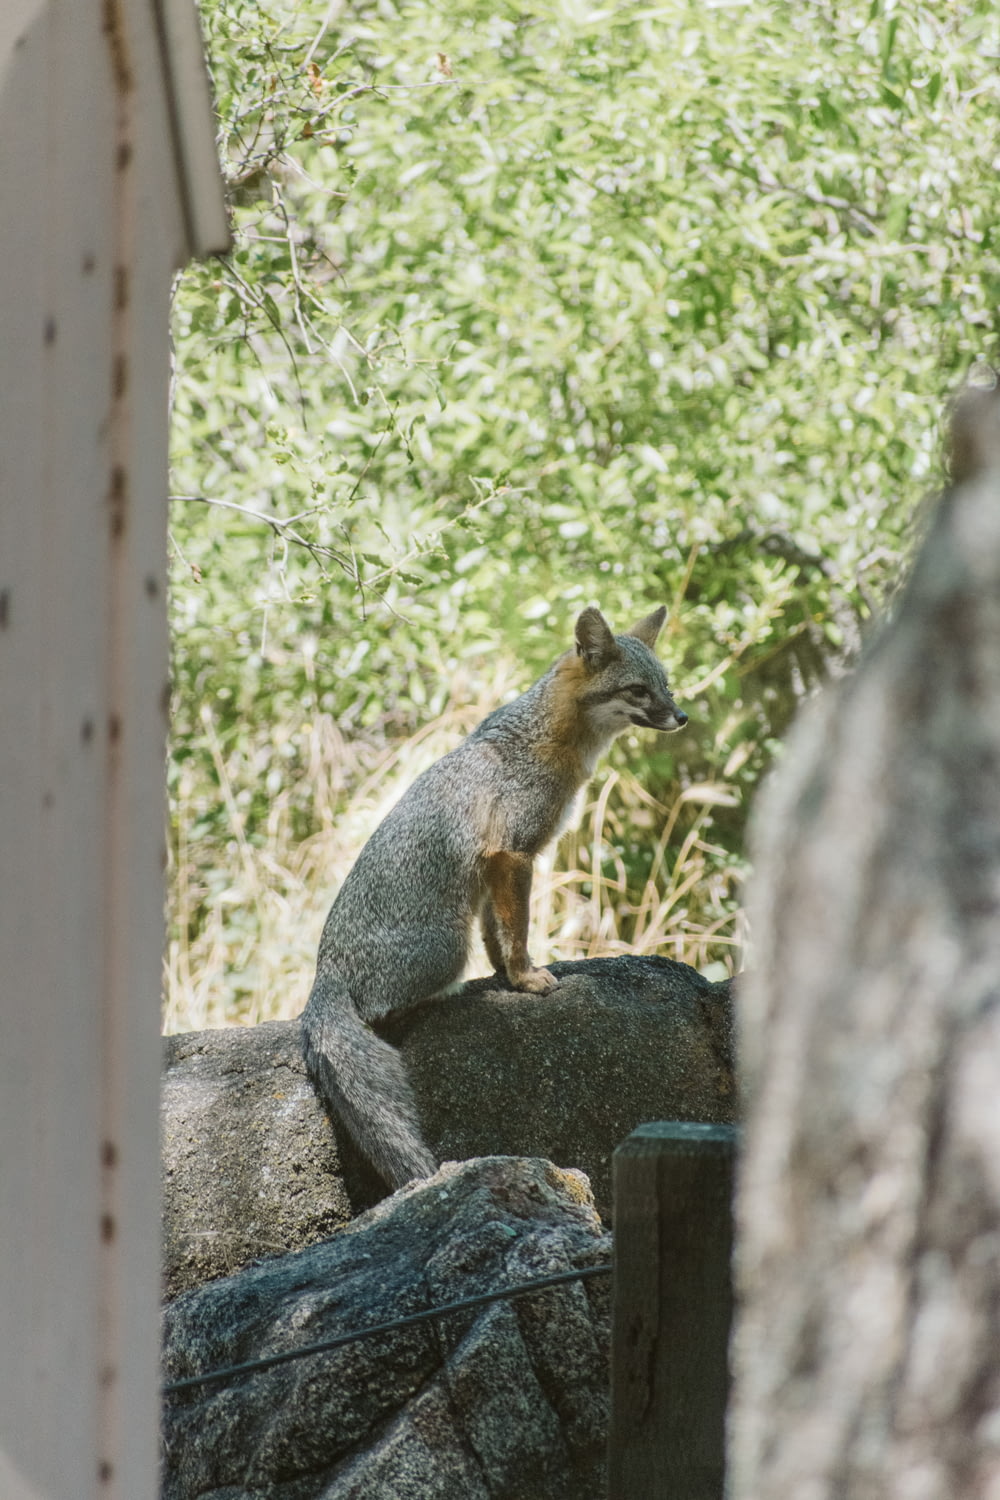 brown fox on gray rock during daytime